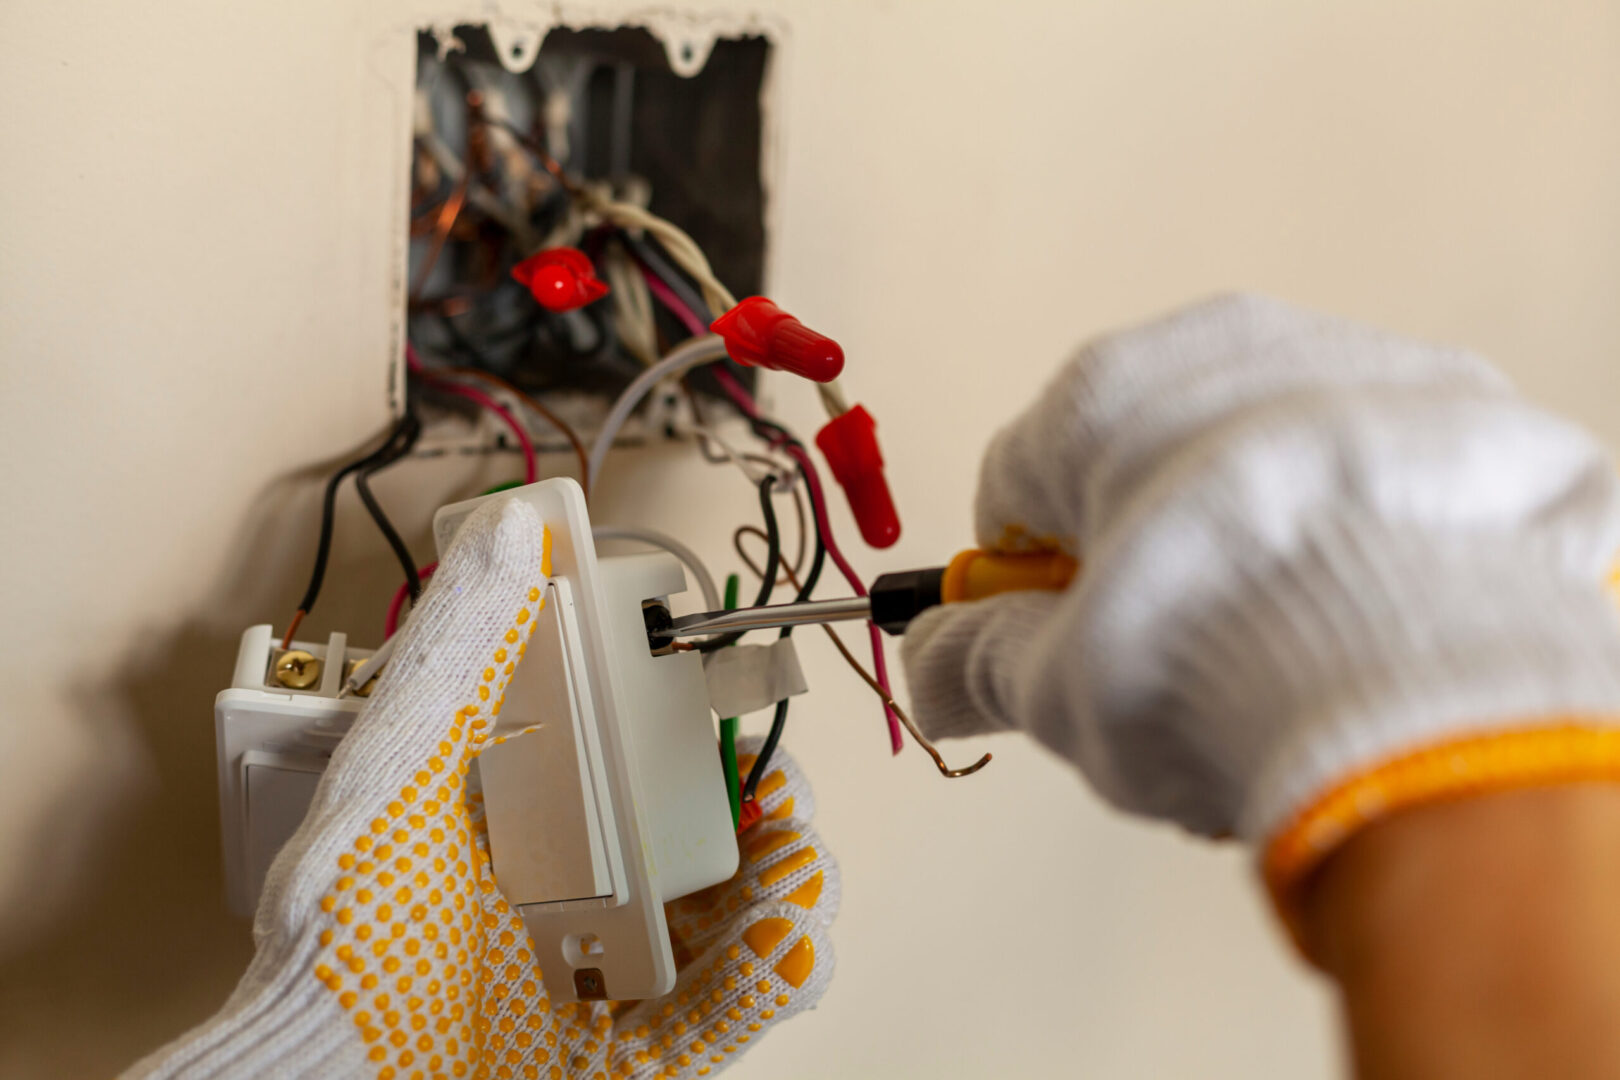 An electrician is replacing a wall switch. A DIY project concept. High voltage danger. installing wire connection using screw driver. The professional wears protective rubber gloves for safety